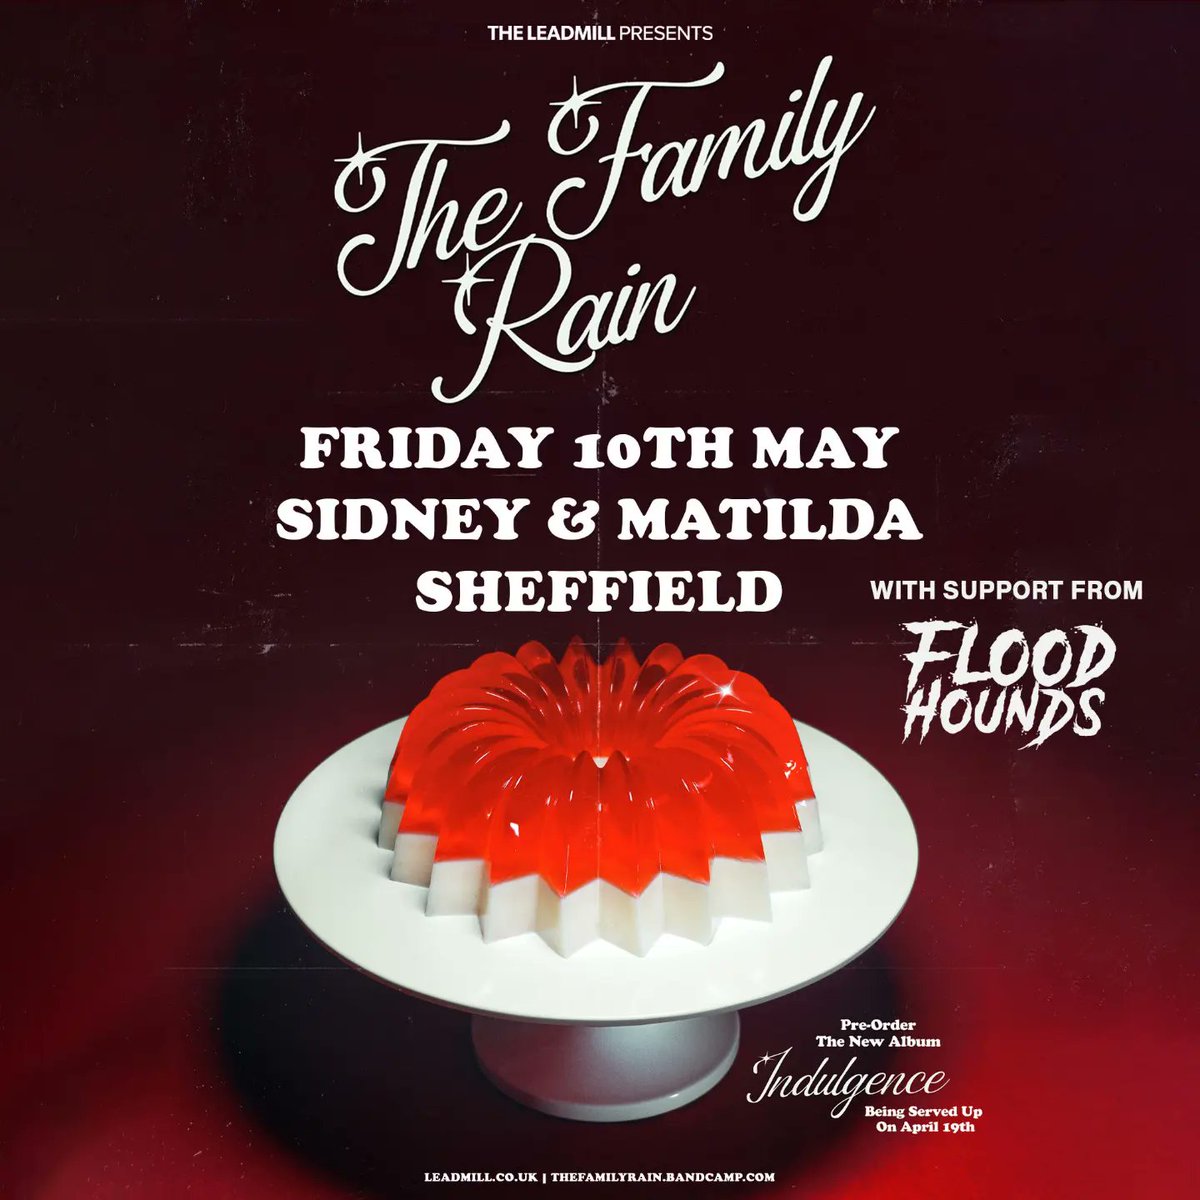 So excited to support The Family Rain on 10th May at @sidneymatilda 🎸 It's on course for a sell out so grab a ticket while you can, via our @Bandcamp page floodhounds.bandcamp.com/merch/fh-suppo… #concert #gig #sheffield #livemusic